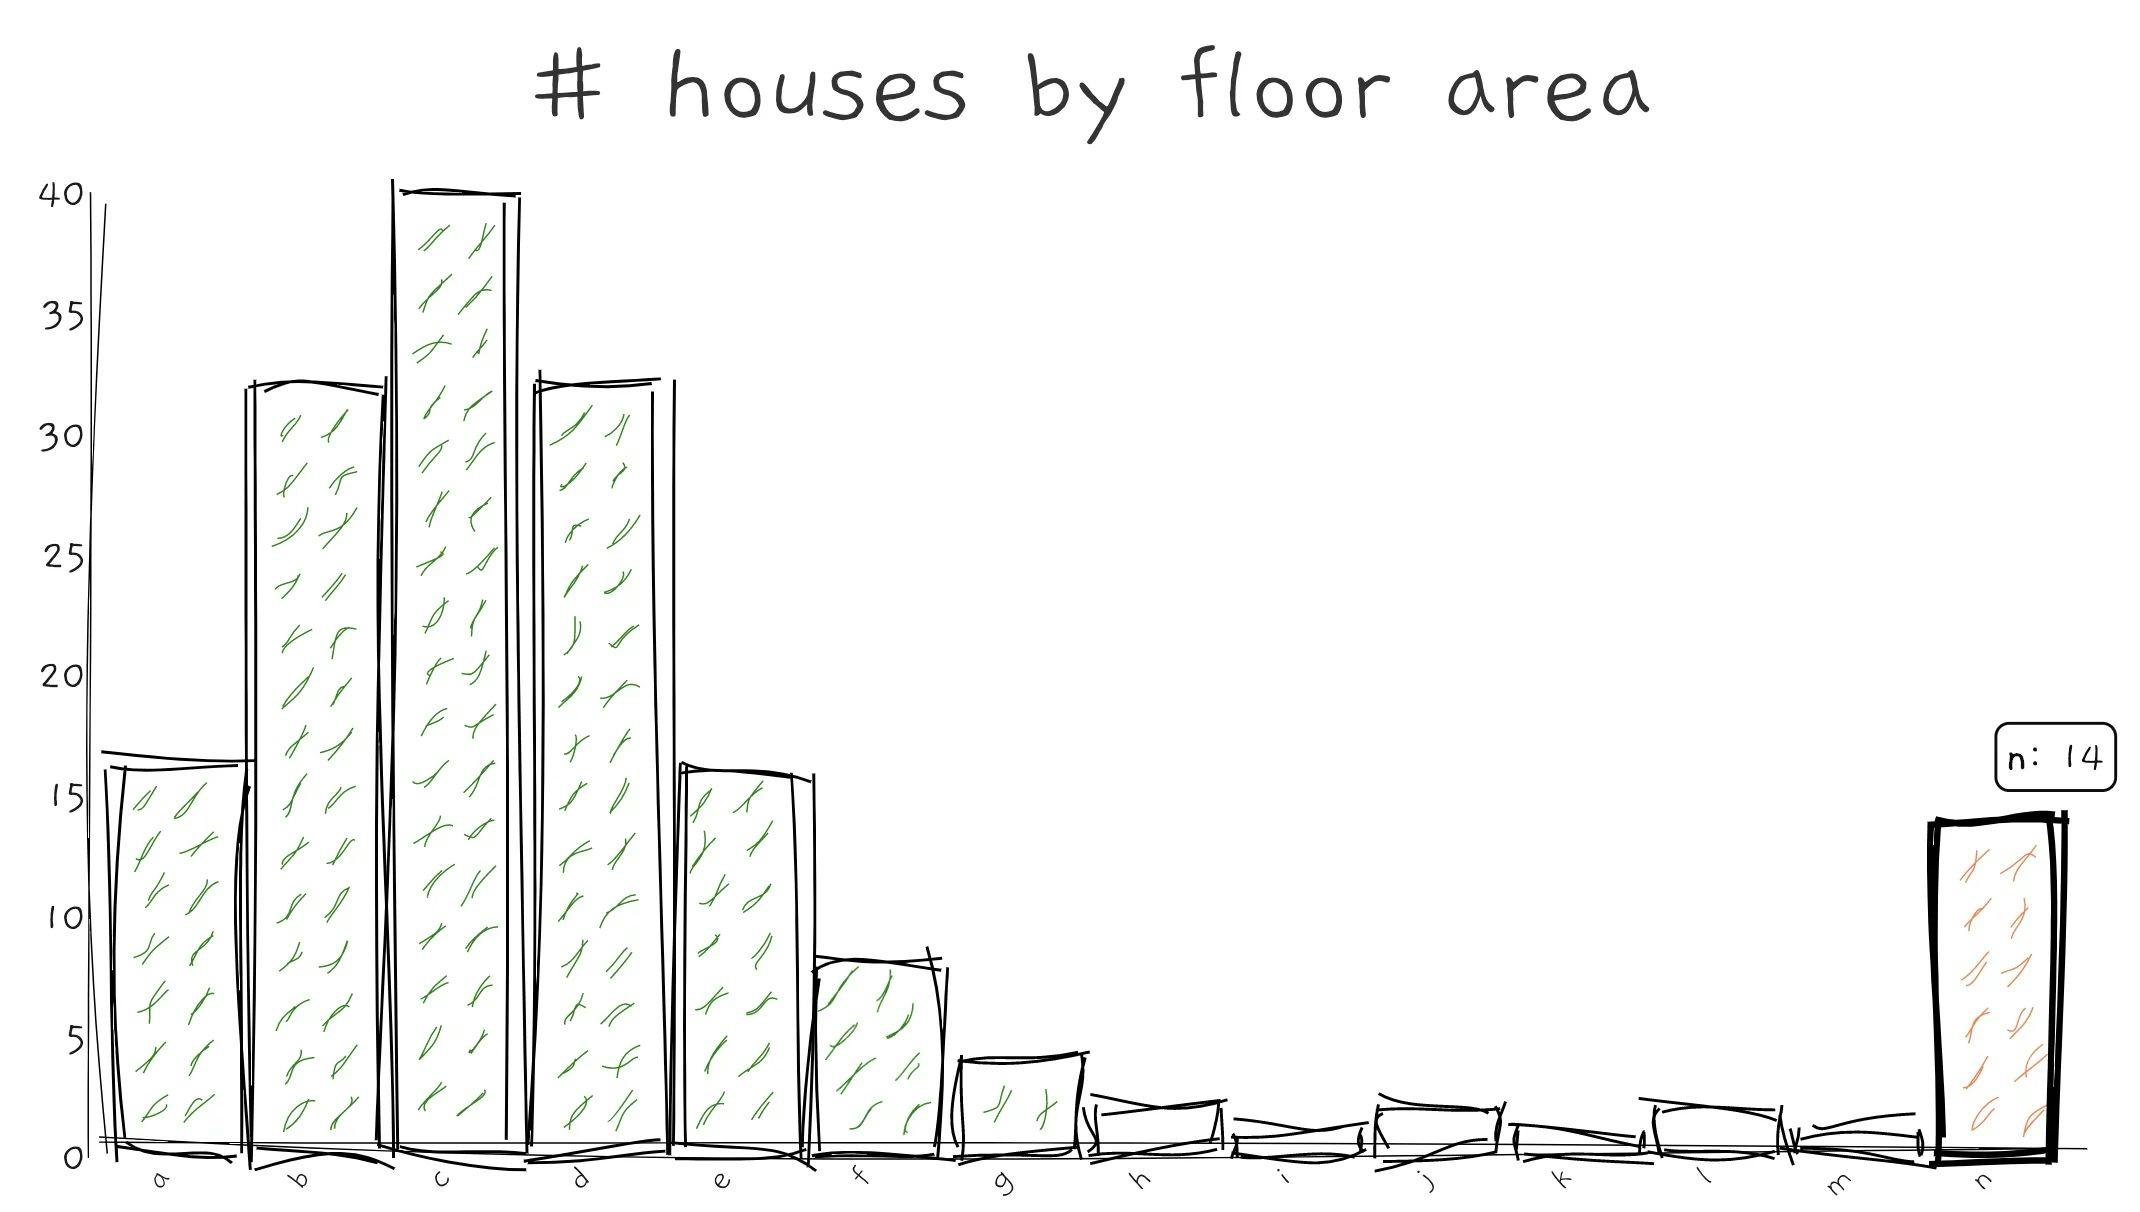 Left: a number of houses with humongous floor area at the right-most bar. Right: a number of people with -1 age.